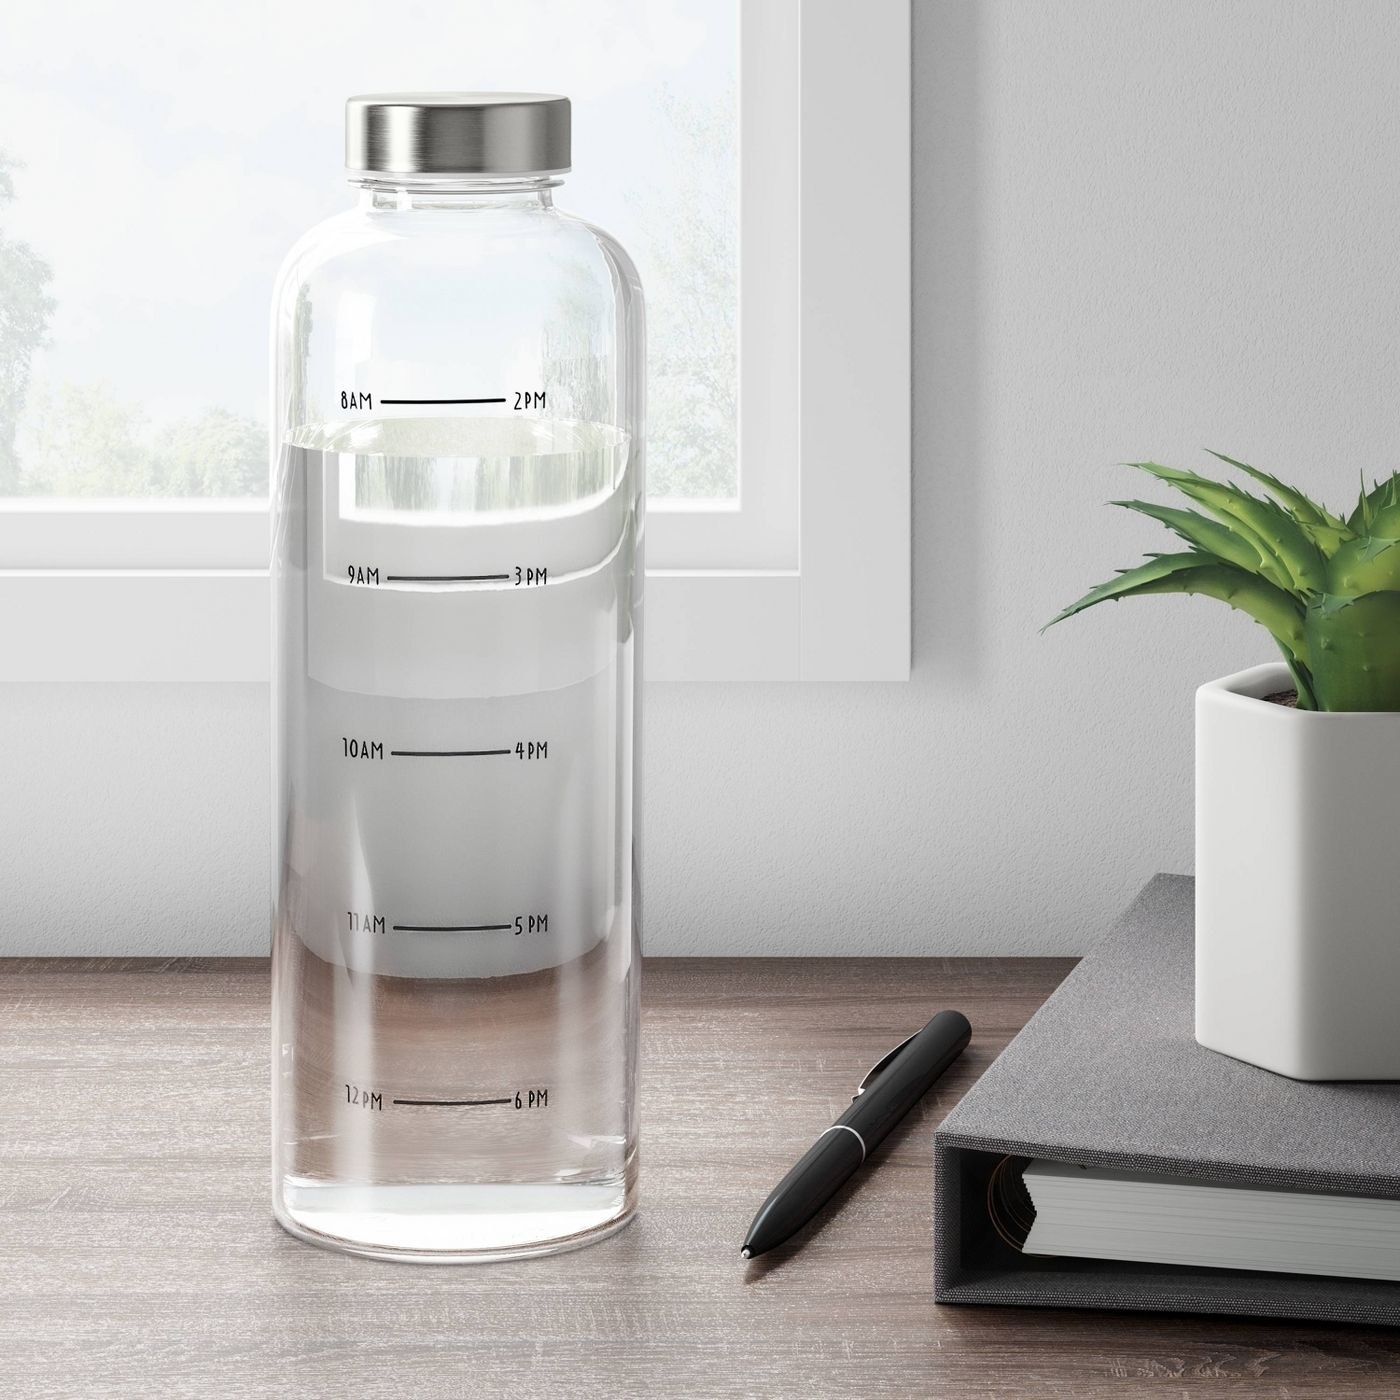 The portable water bottle with time markings